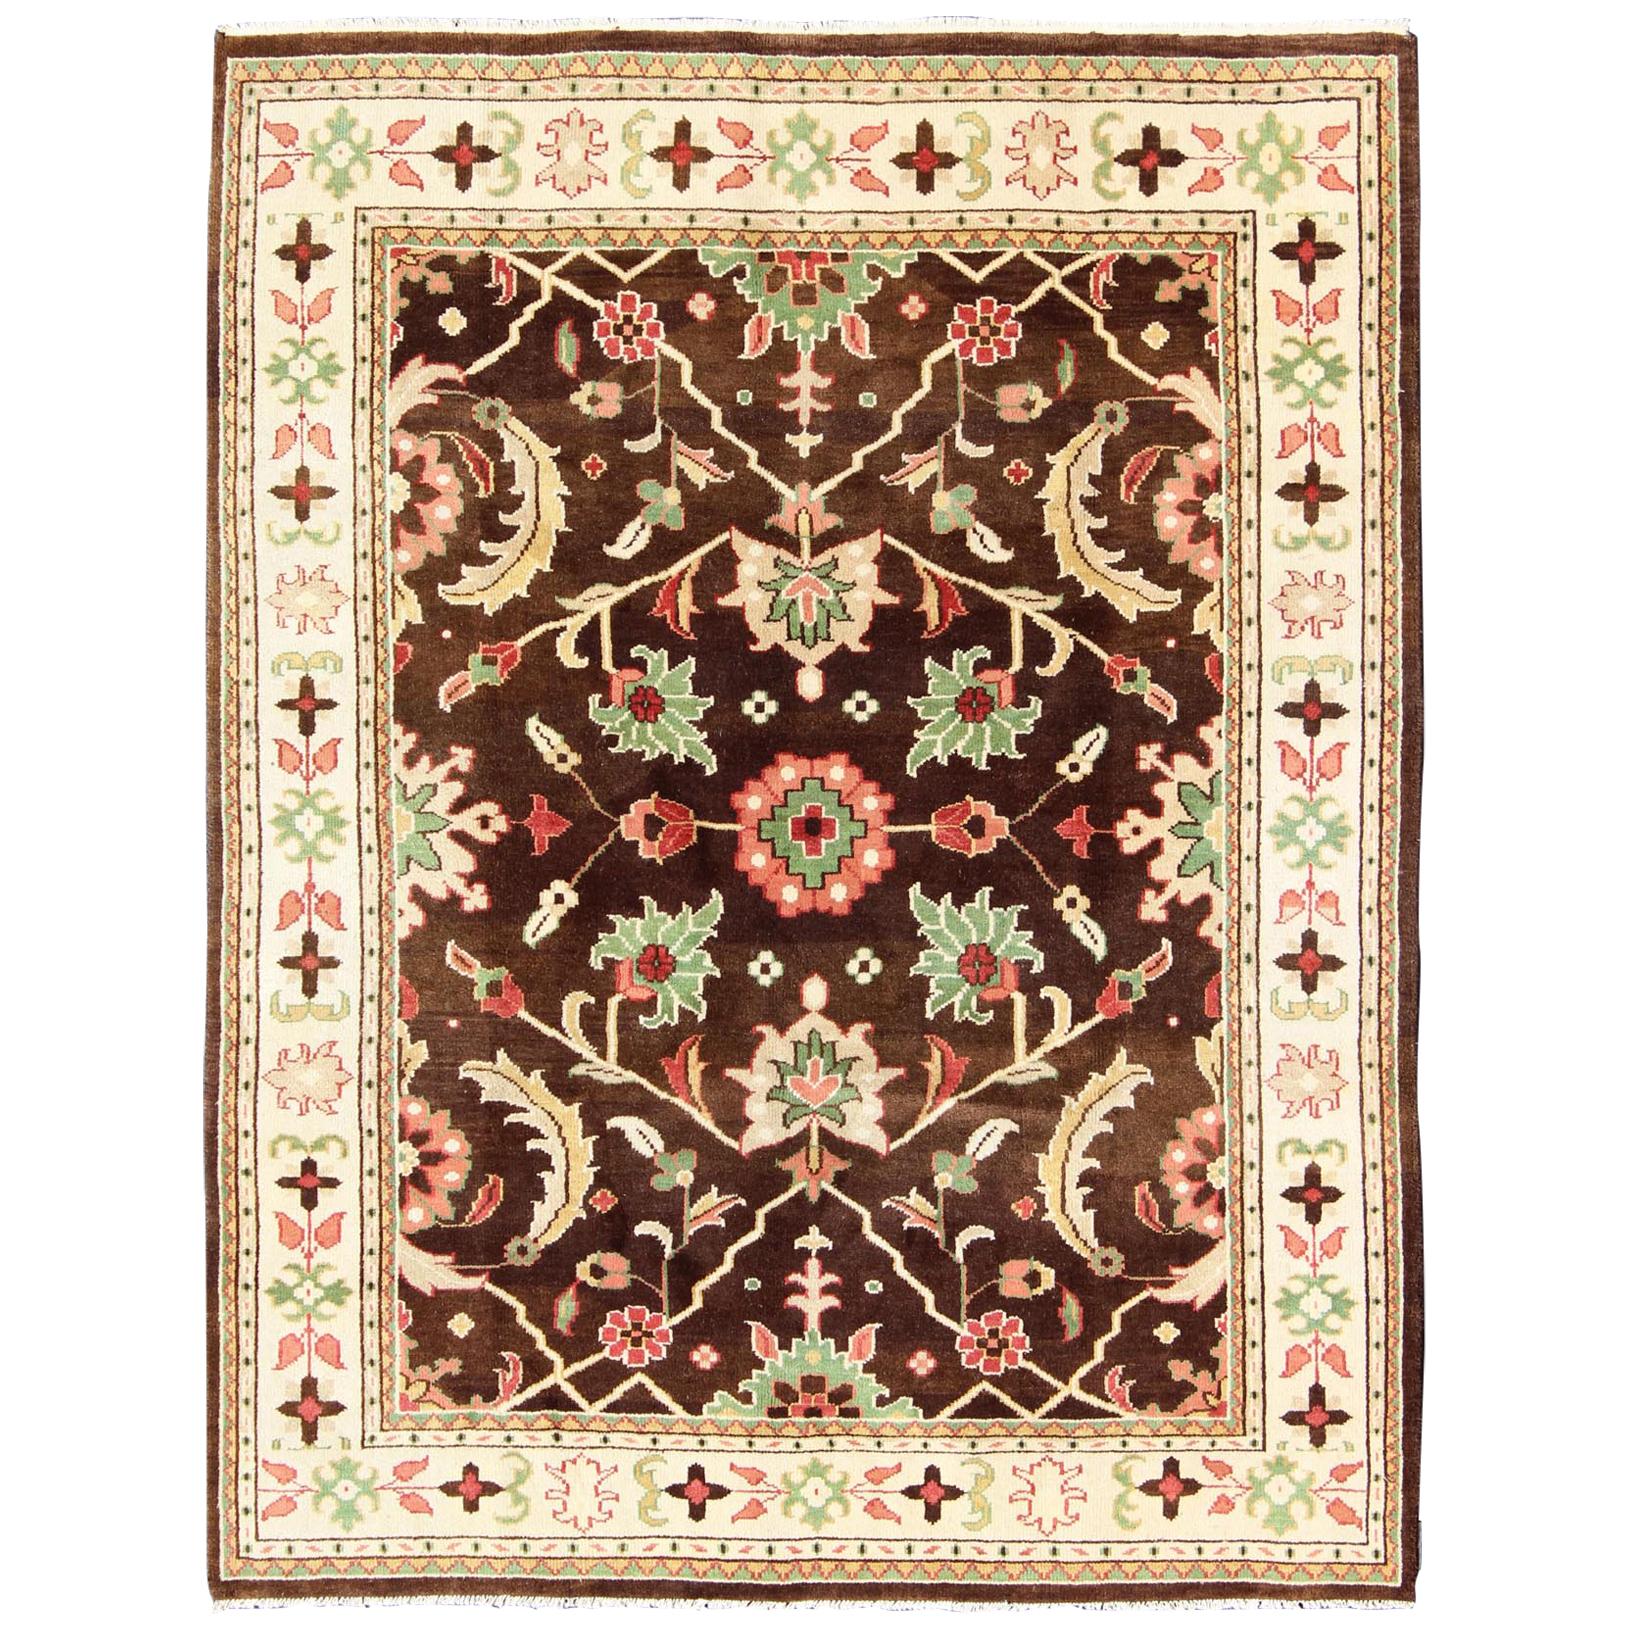 Brown, Green, Coral, and Mint Indian Mahal Design Rug with Vining Flower Design